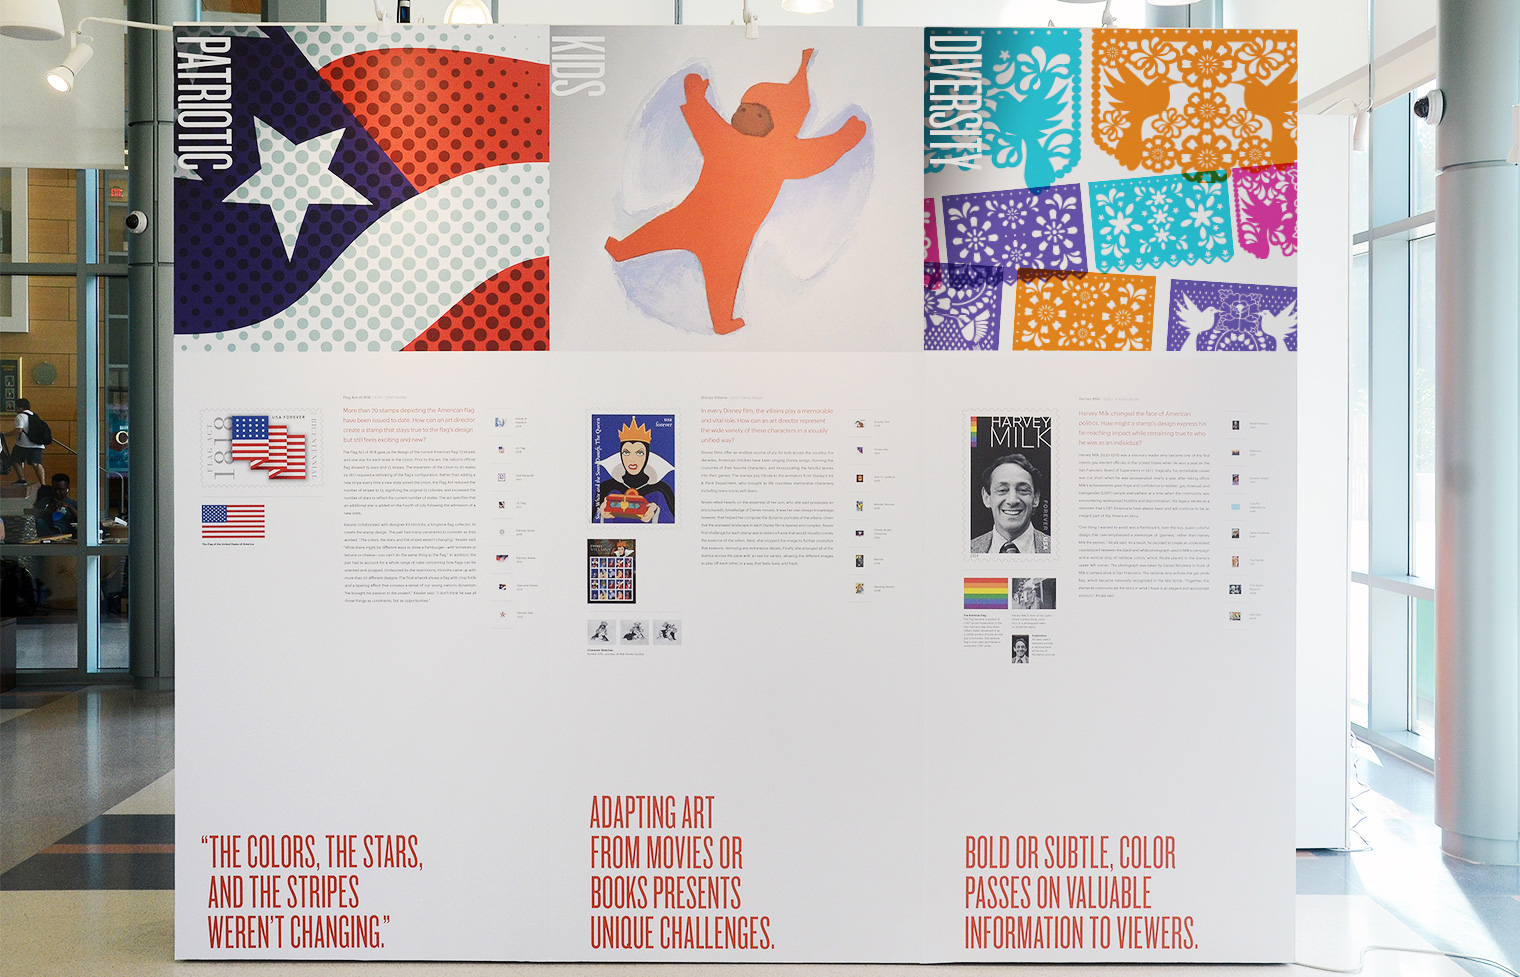 These panels highlight Patriotism, Kids, and Diversity such as the American flag, The Snowy Day and art of papel picado.